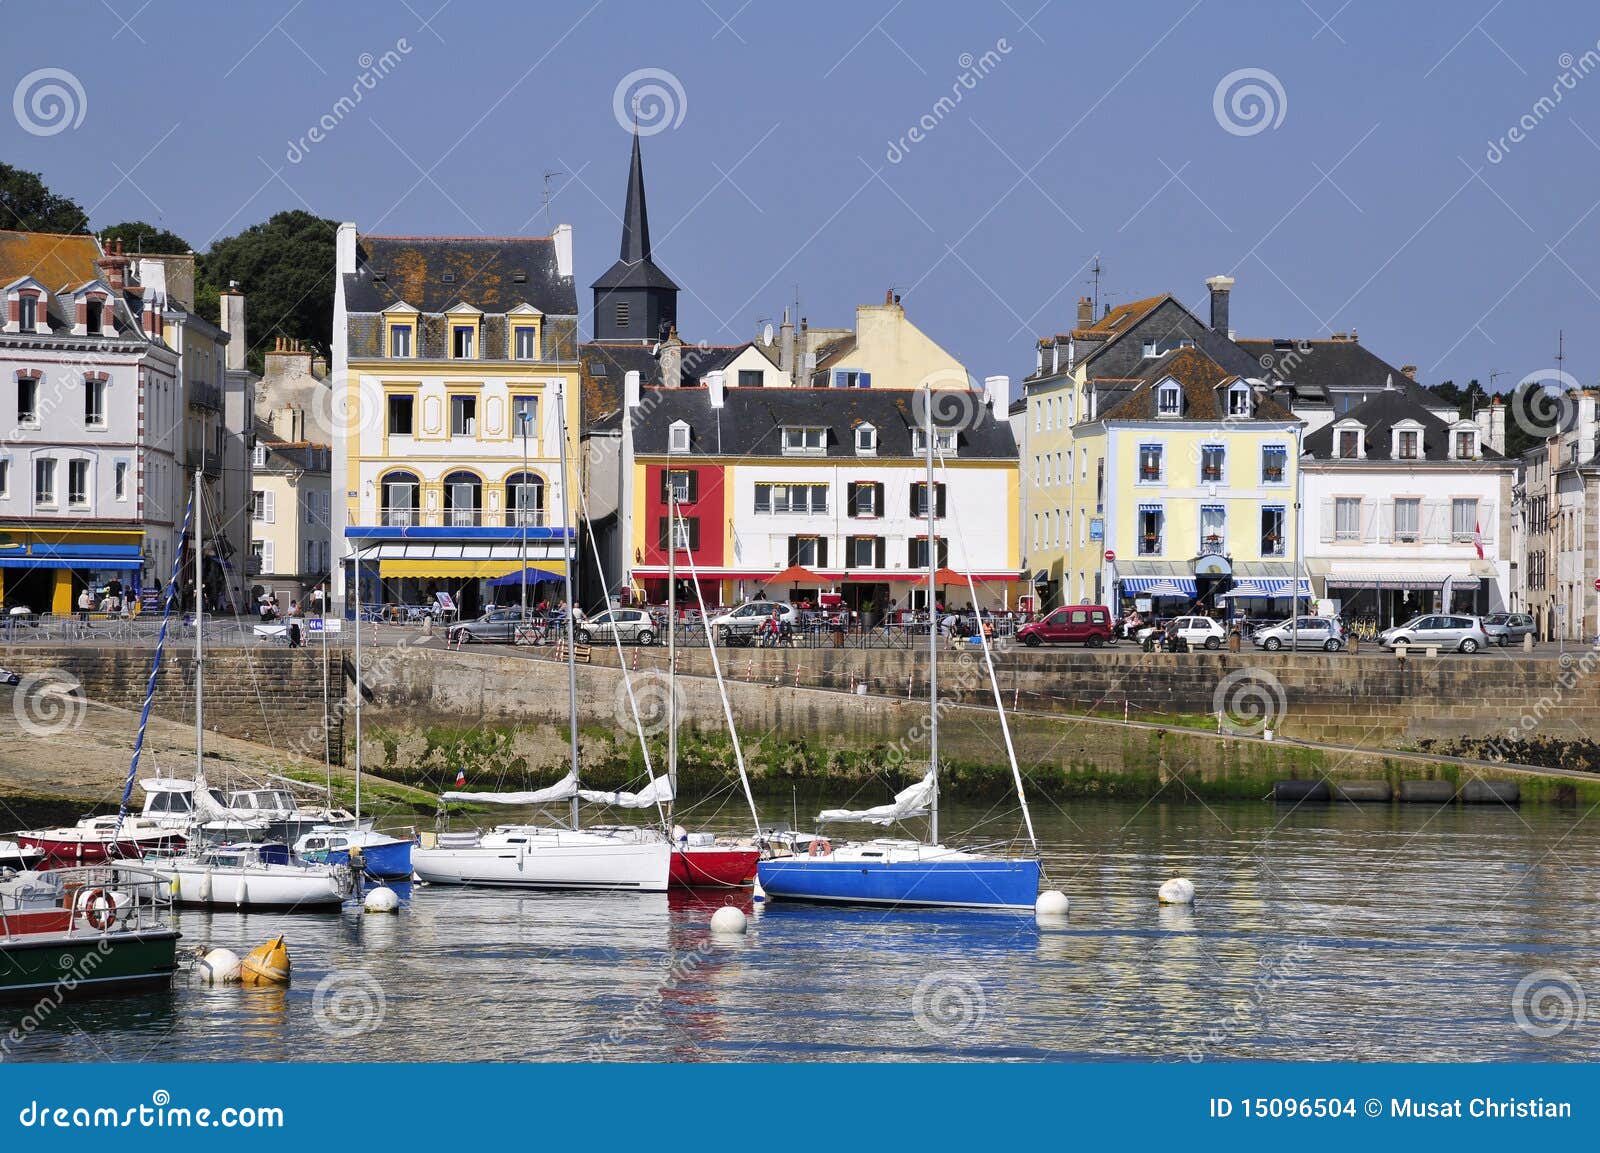 port of le palais at belle ile in france